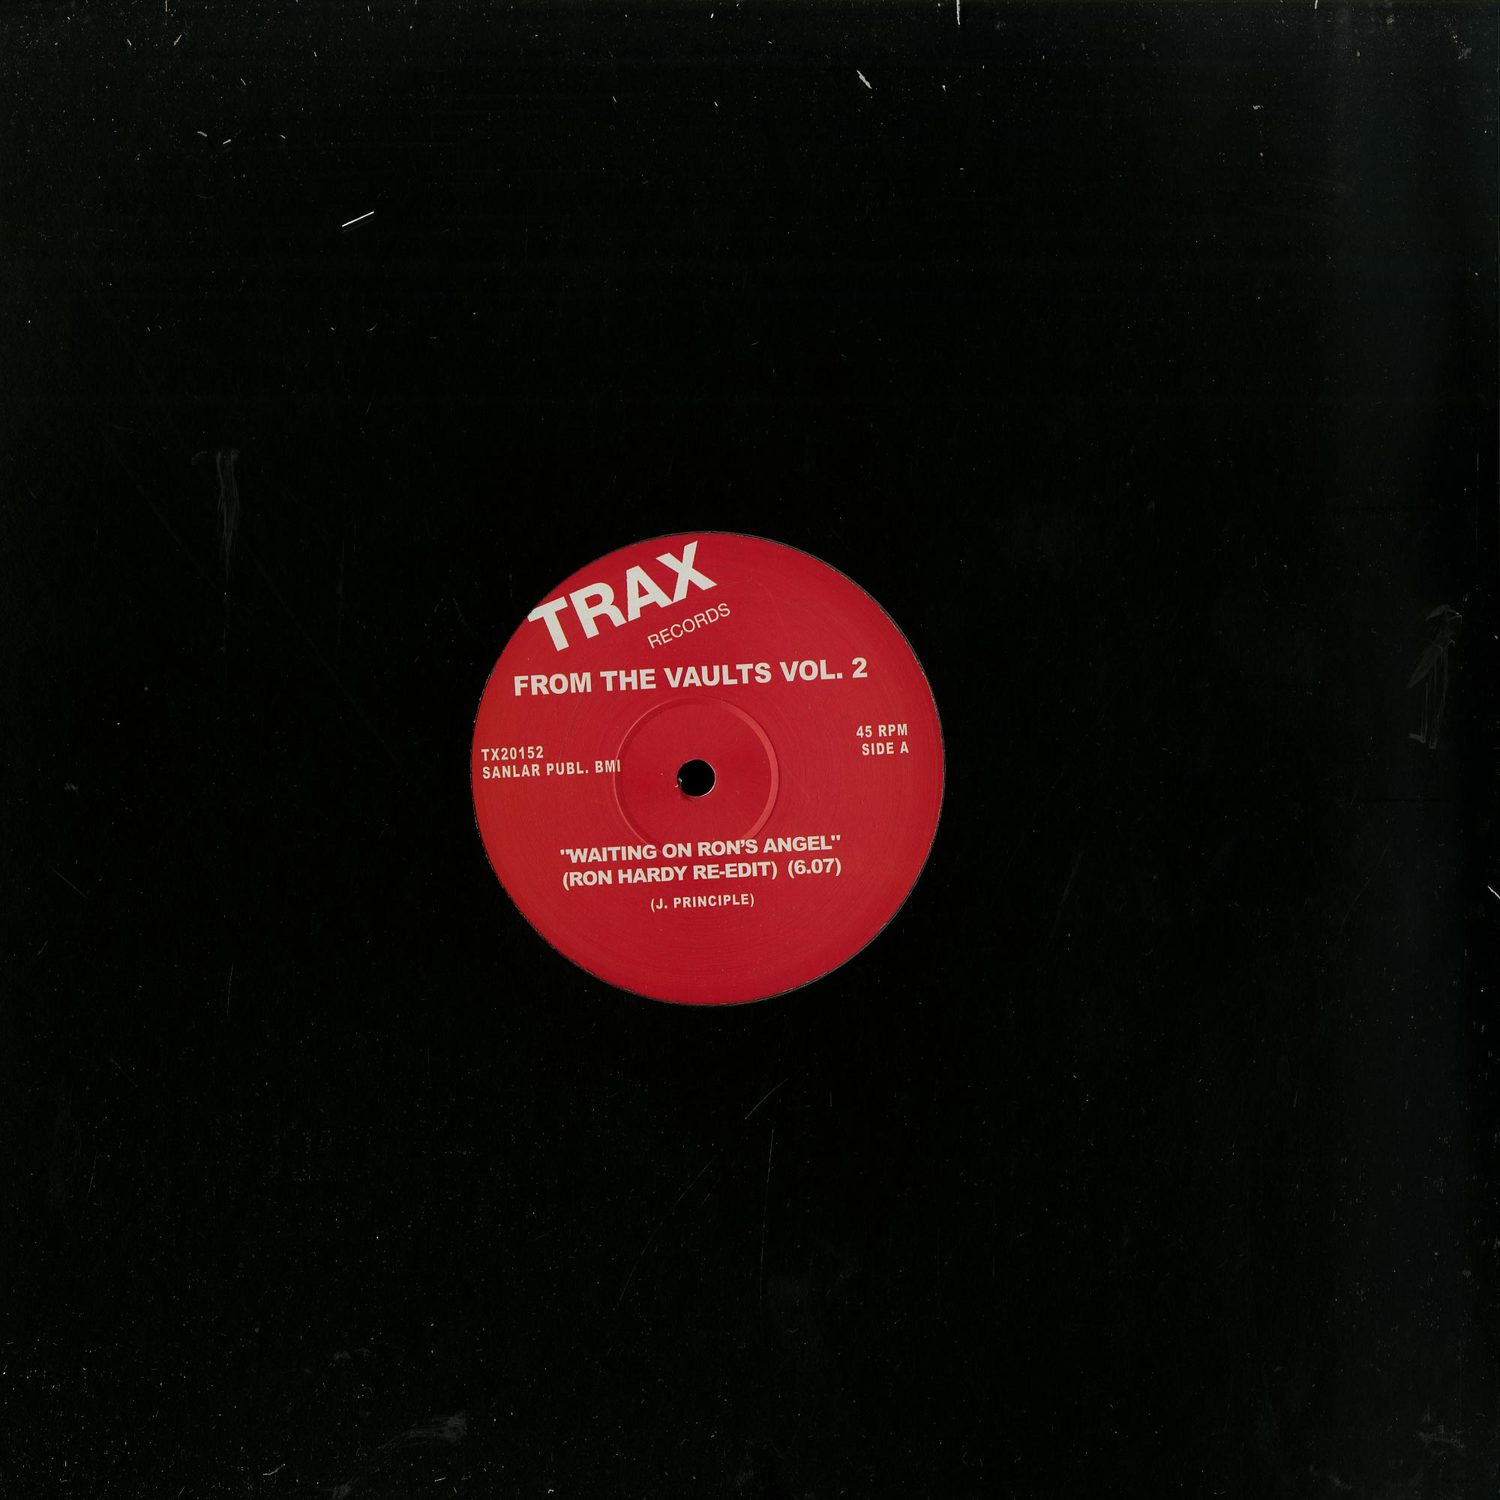 Frankie Knuckles / Jamie Principle - FROM THE VAULTS VOL. 2